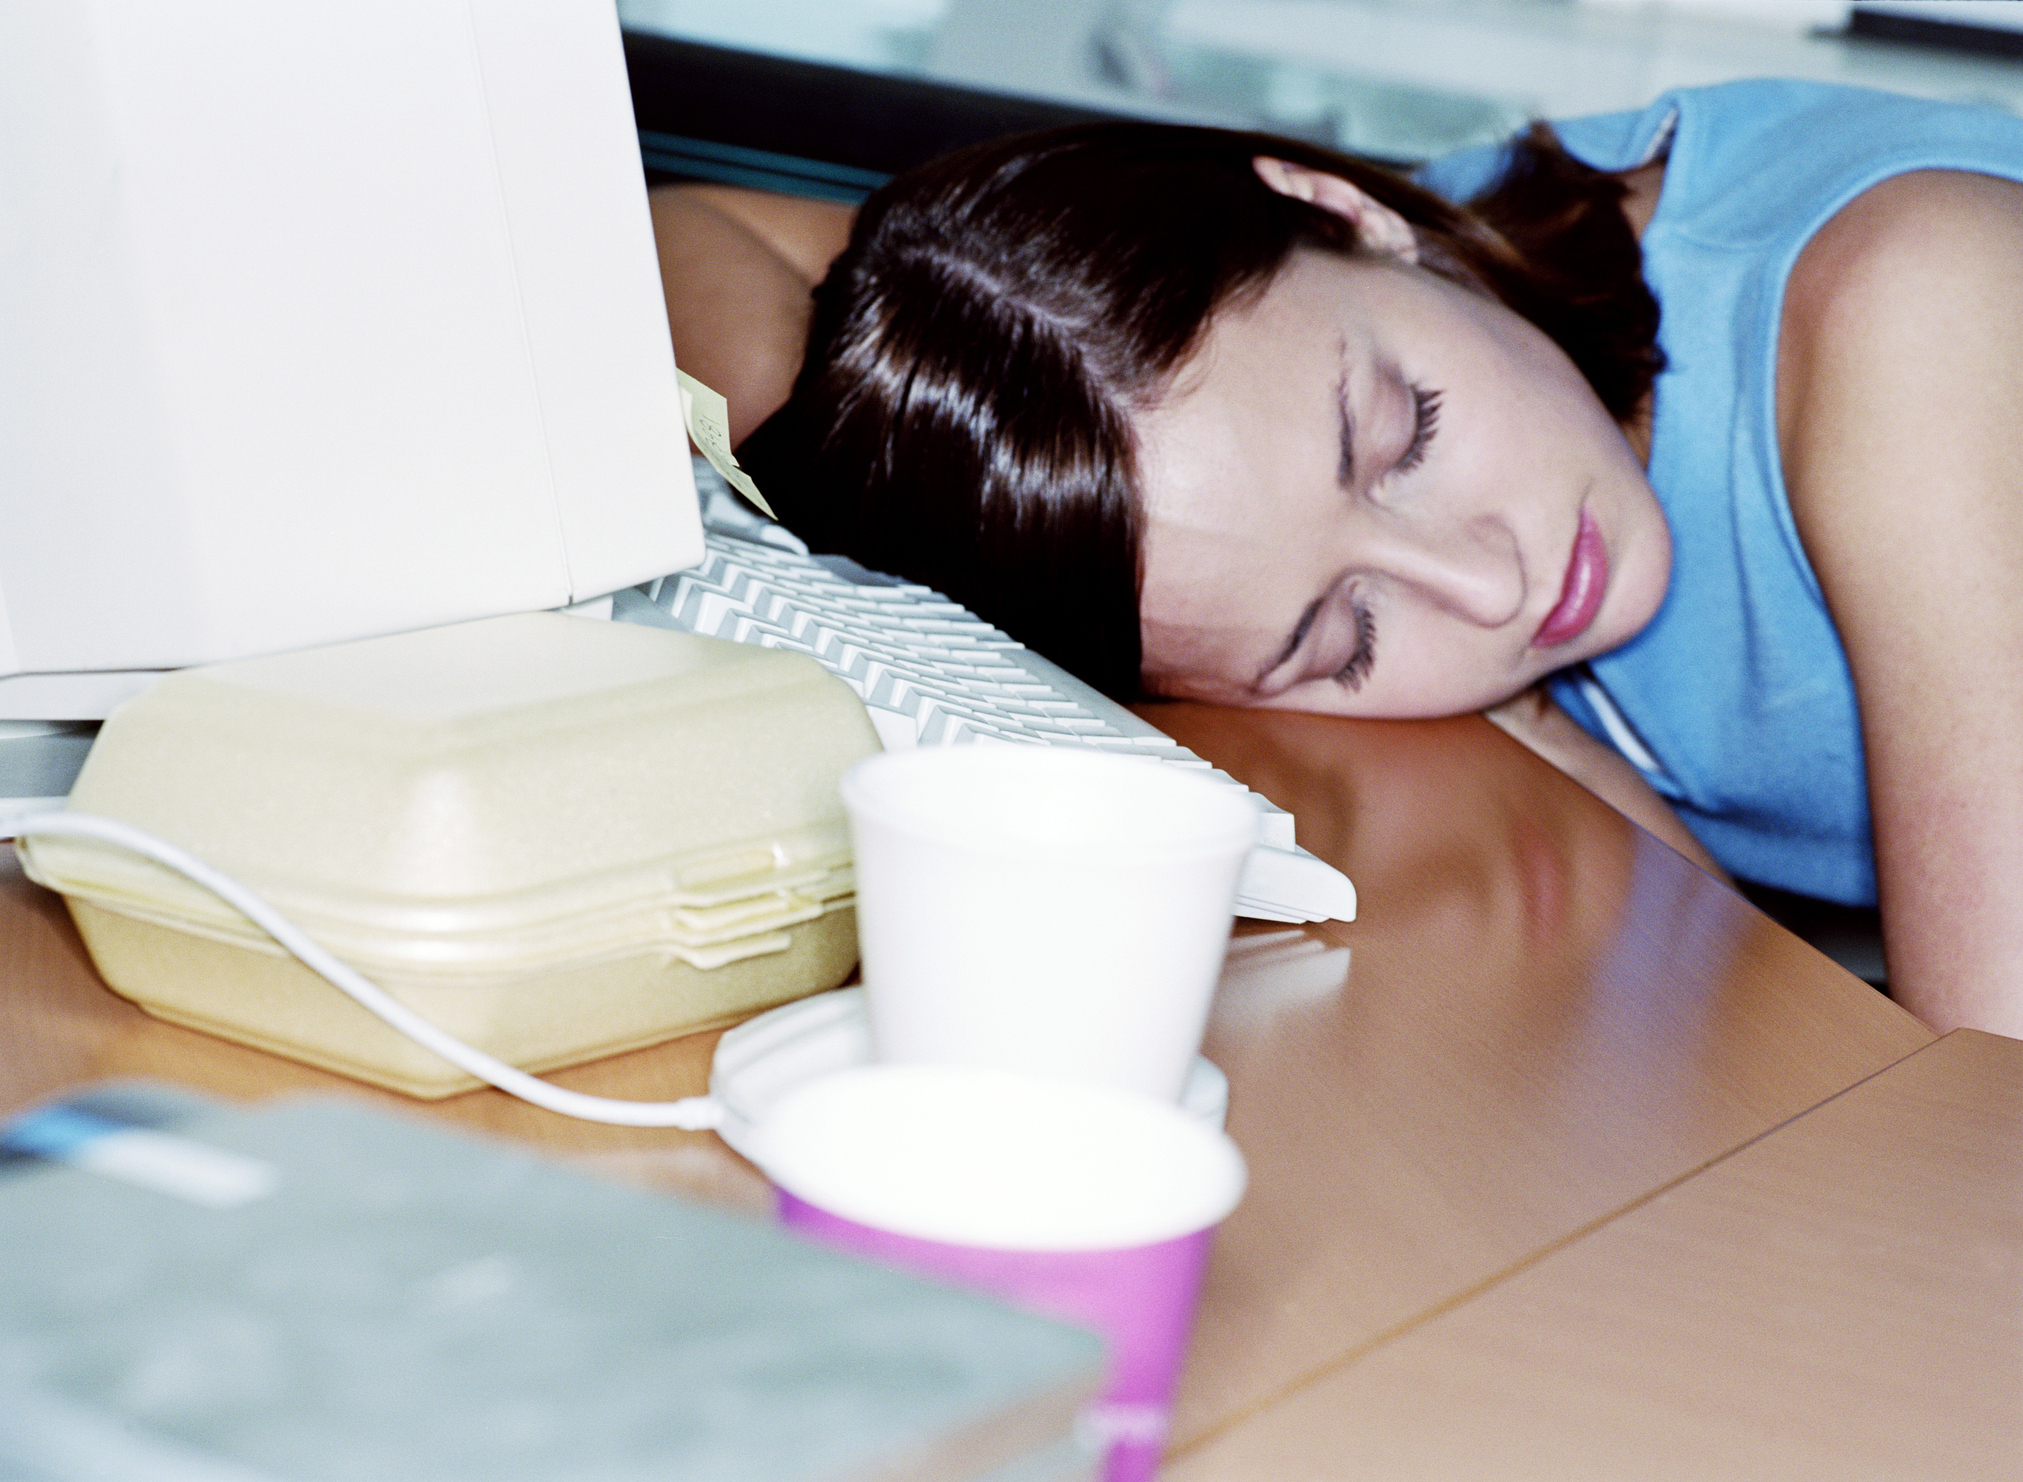 Woman resting head on desk next to computer and foam cups, appearing exhausted or asleep